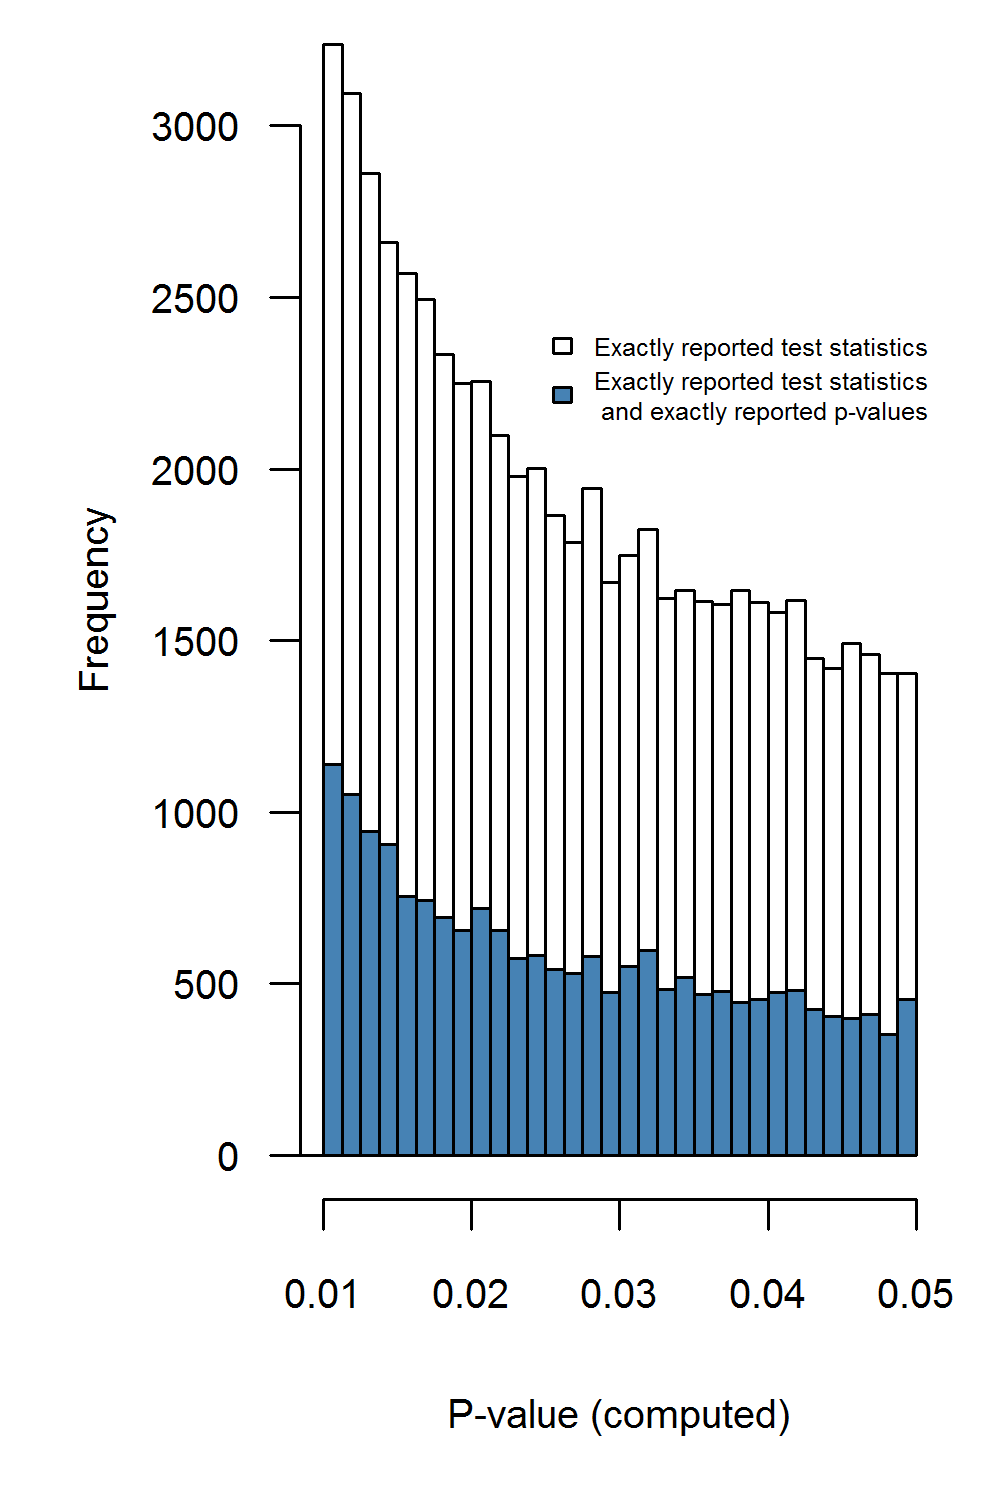 Recalculated $p$-values for exactly reported test statistics (white bars), and recalculated $p$-values for exactly reported test statistics where $p$-values are also exactly reported (blue bars). Binwidth = .00125